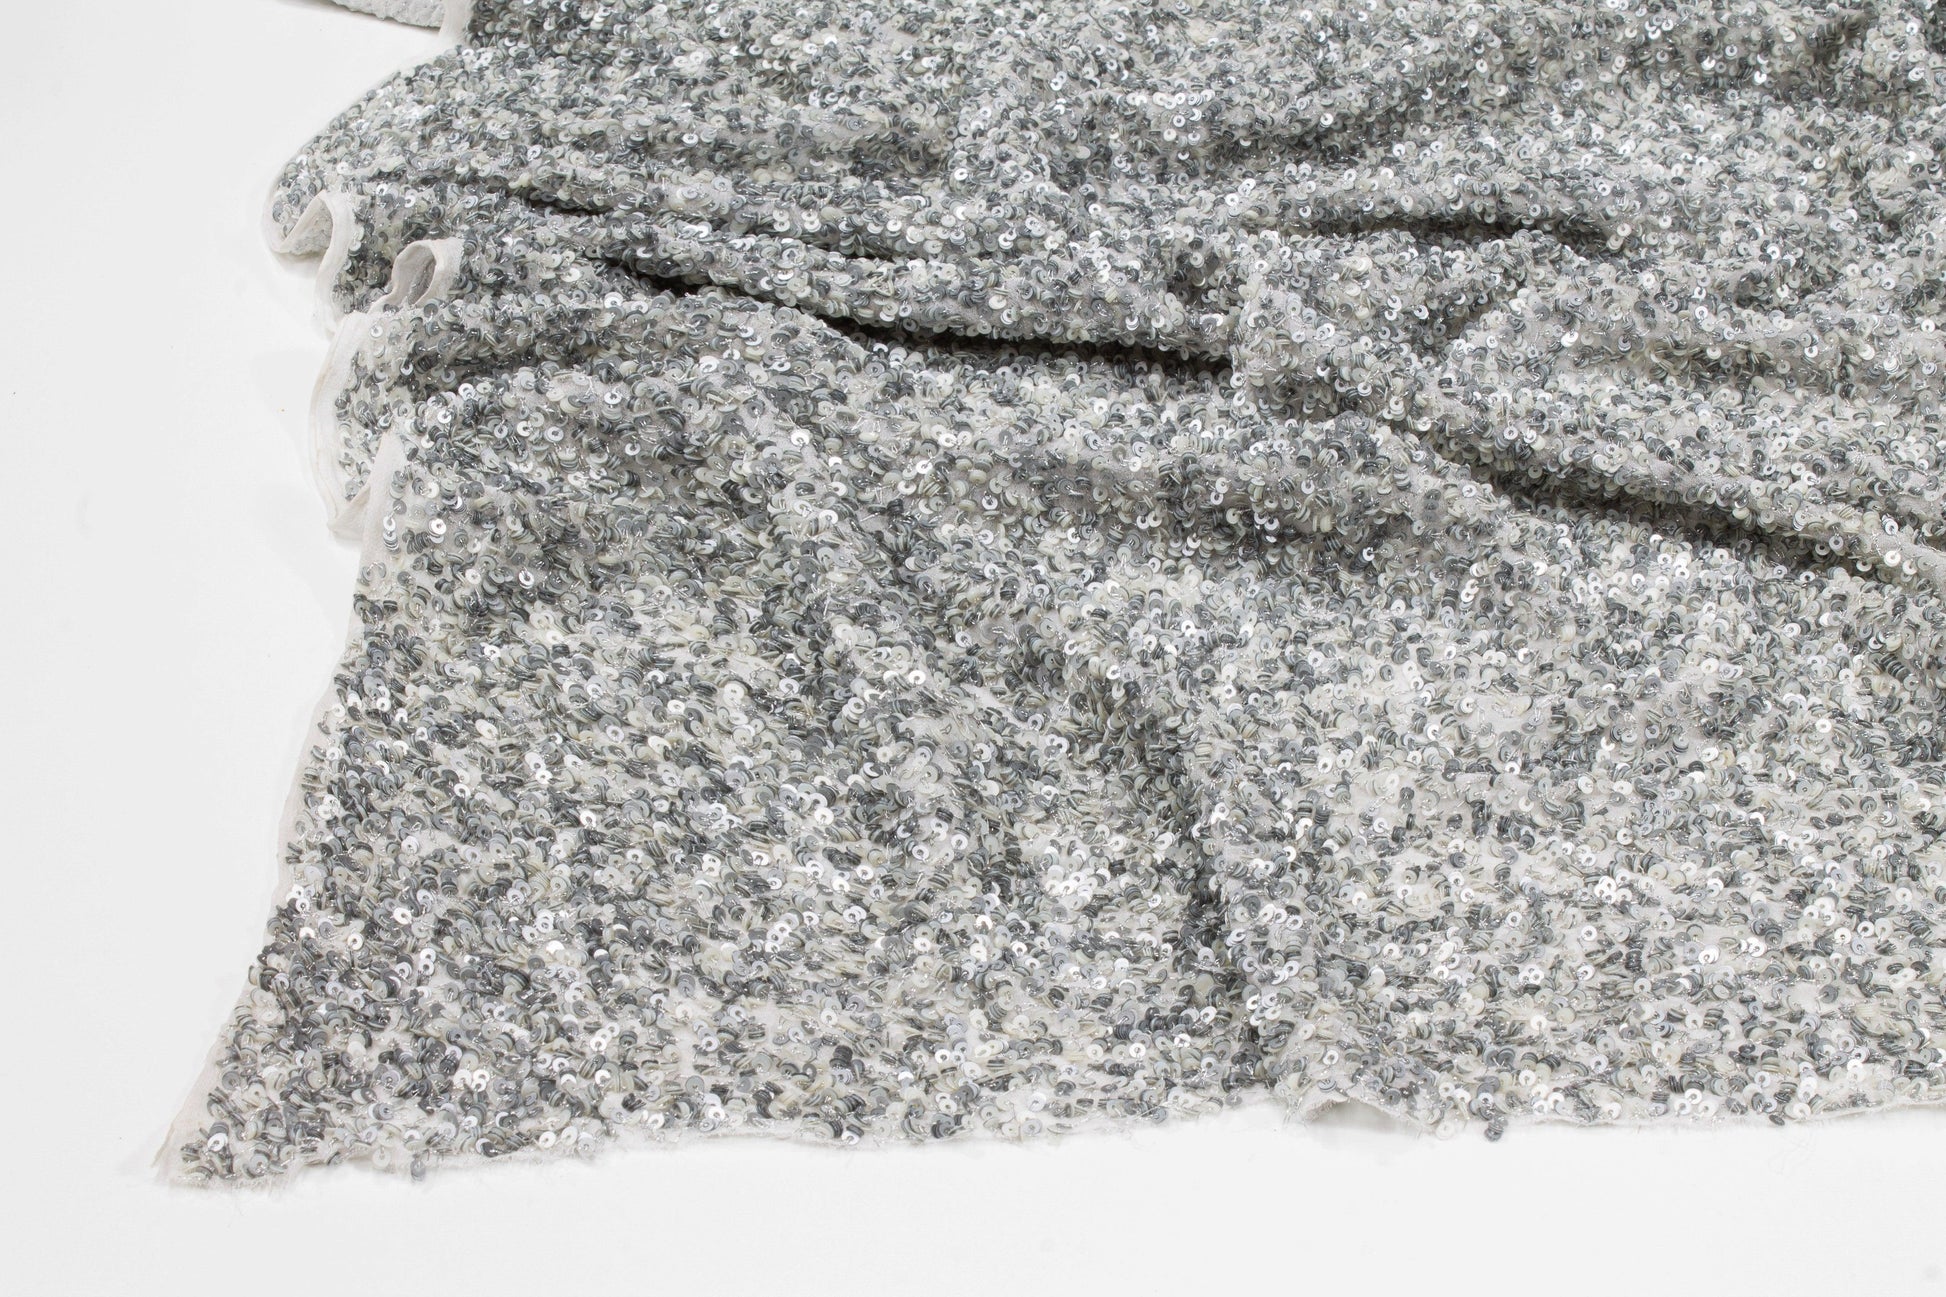 Hand Sequined Rayon Georgette - Silver Gray - Prime Fabrics